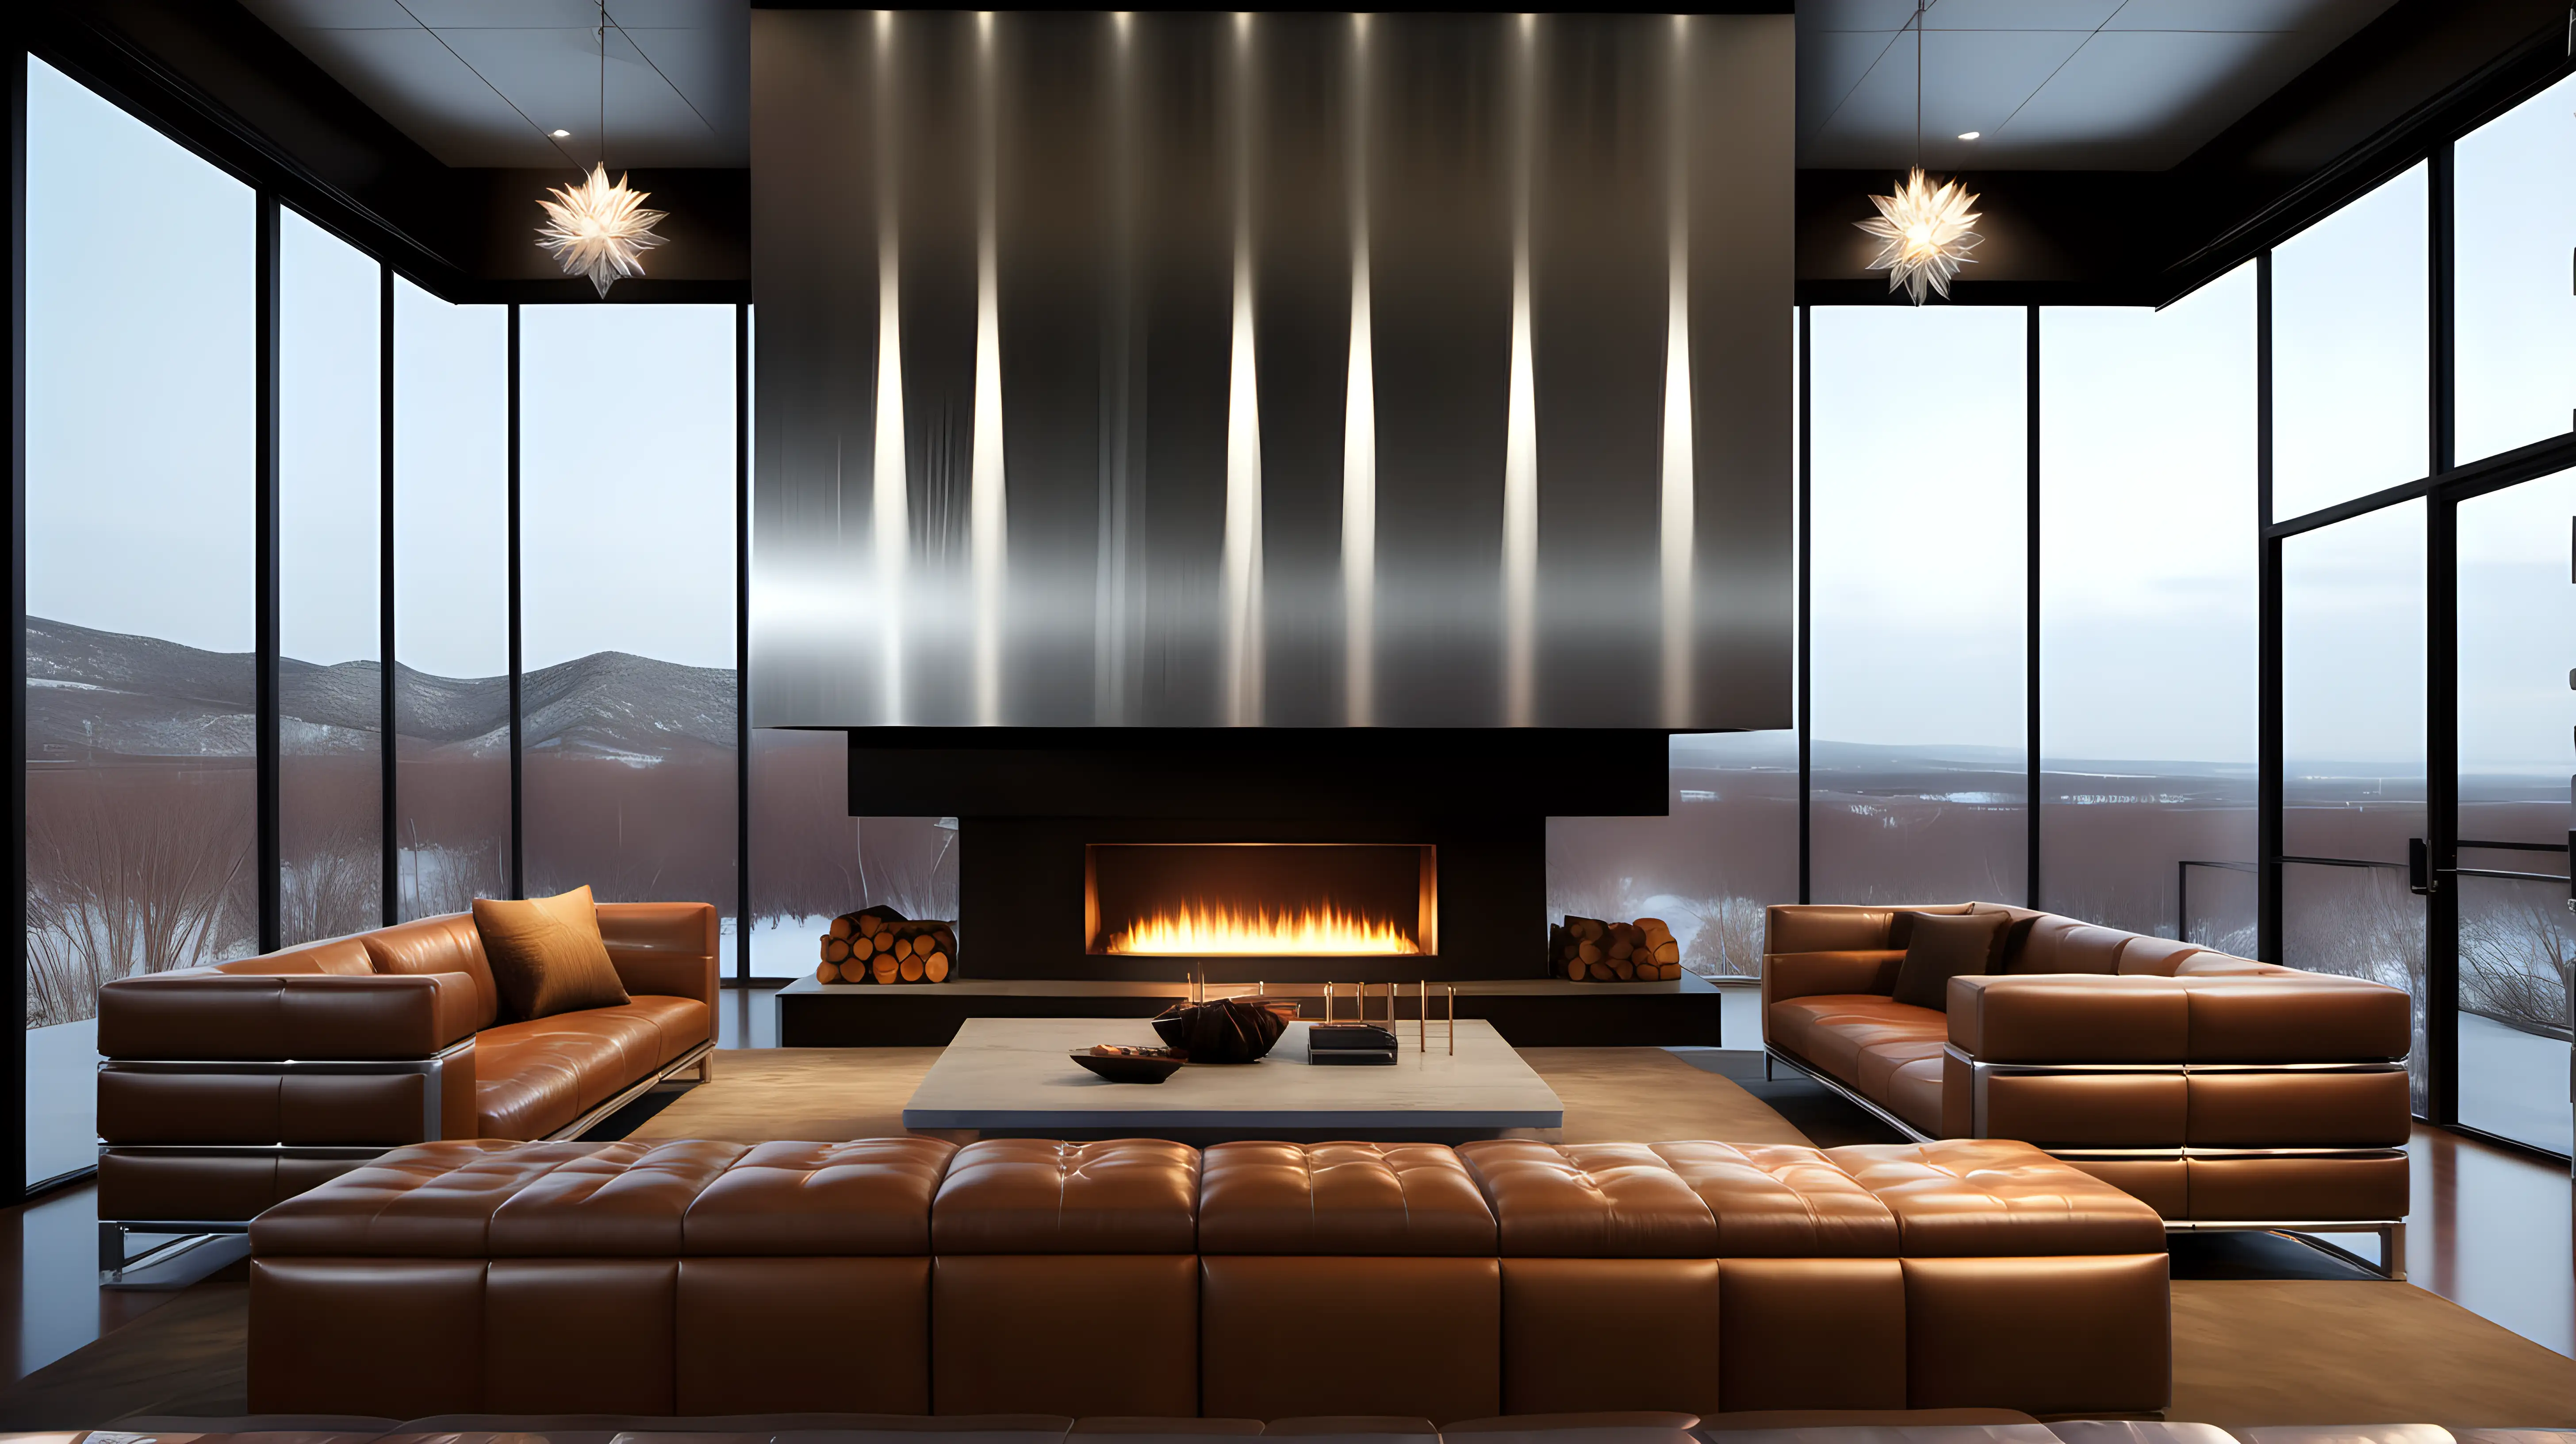 A living room constructed of aluminum paneling and aluminum beams, leather furniture, one fireplace, warm lighting, photo-realistic quality.